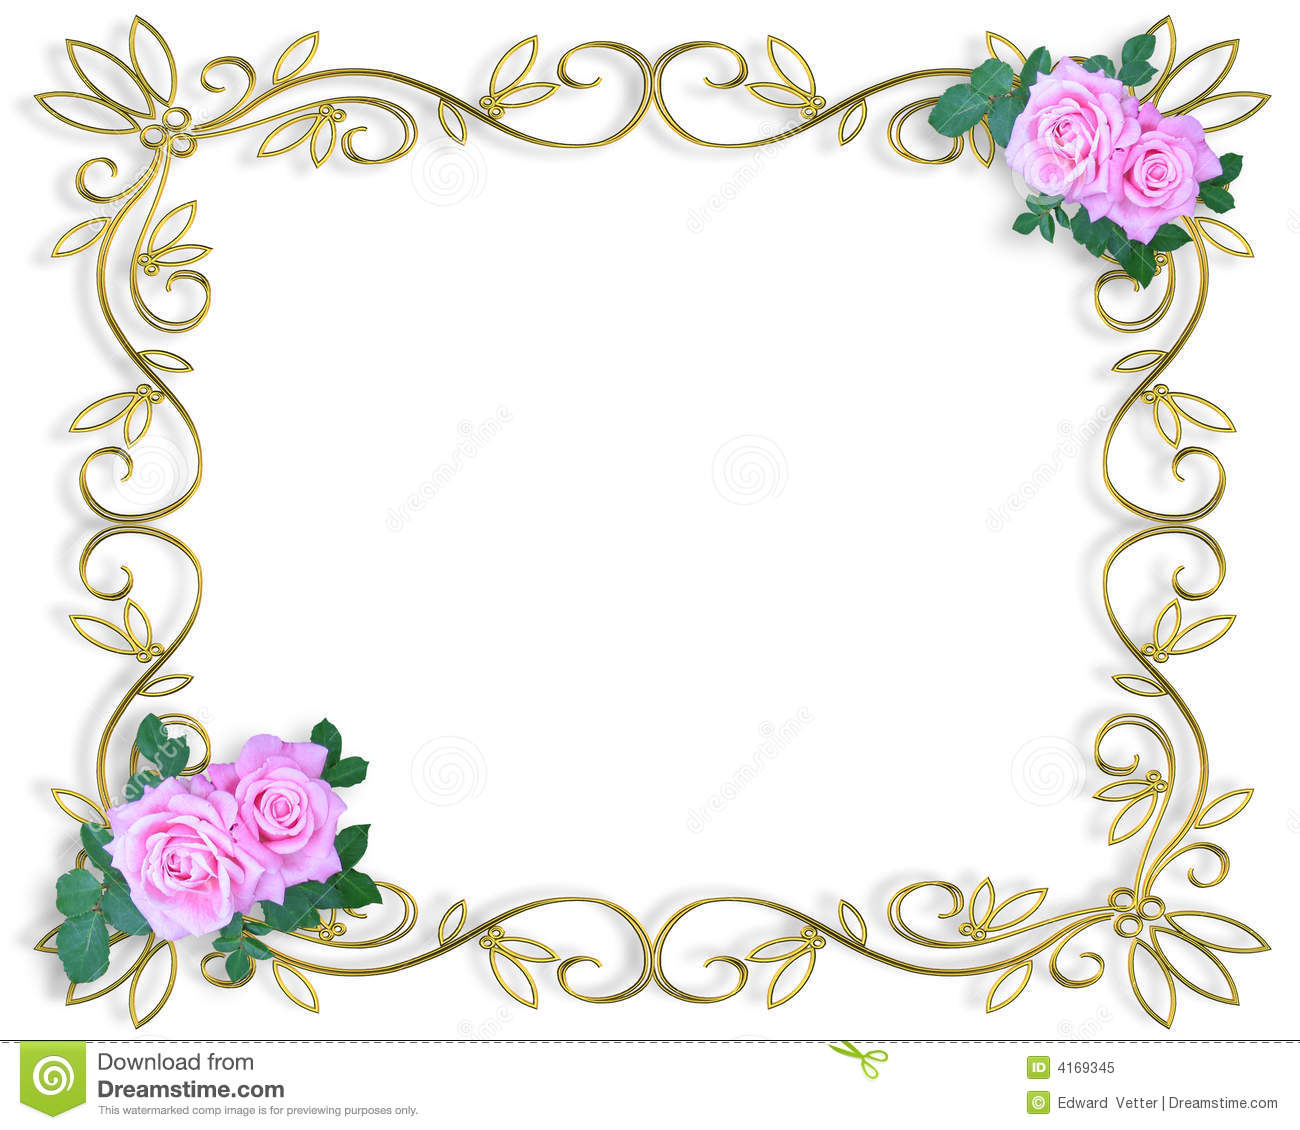 clipart of invitation cards - photo #34